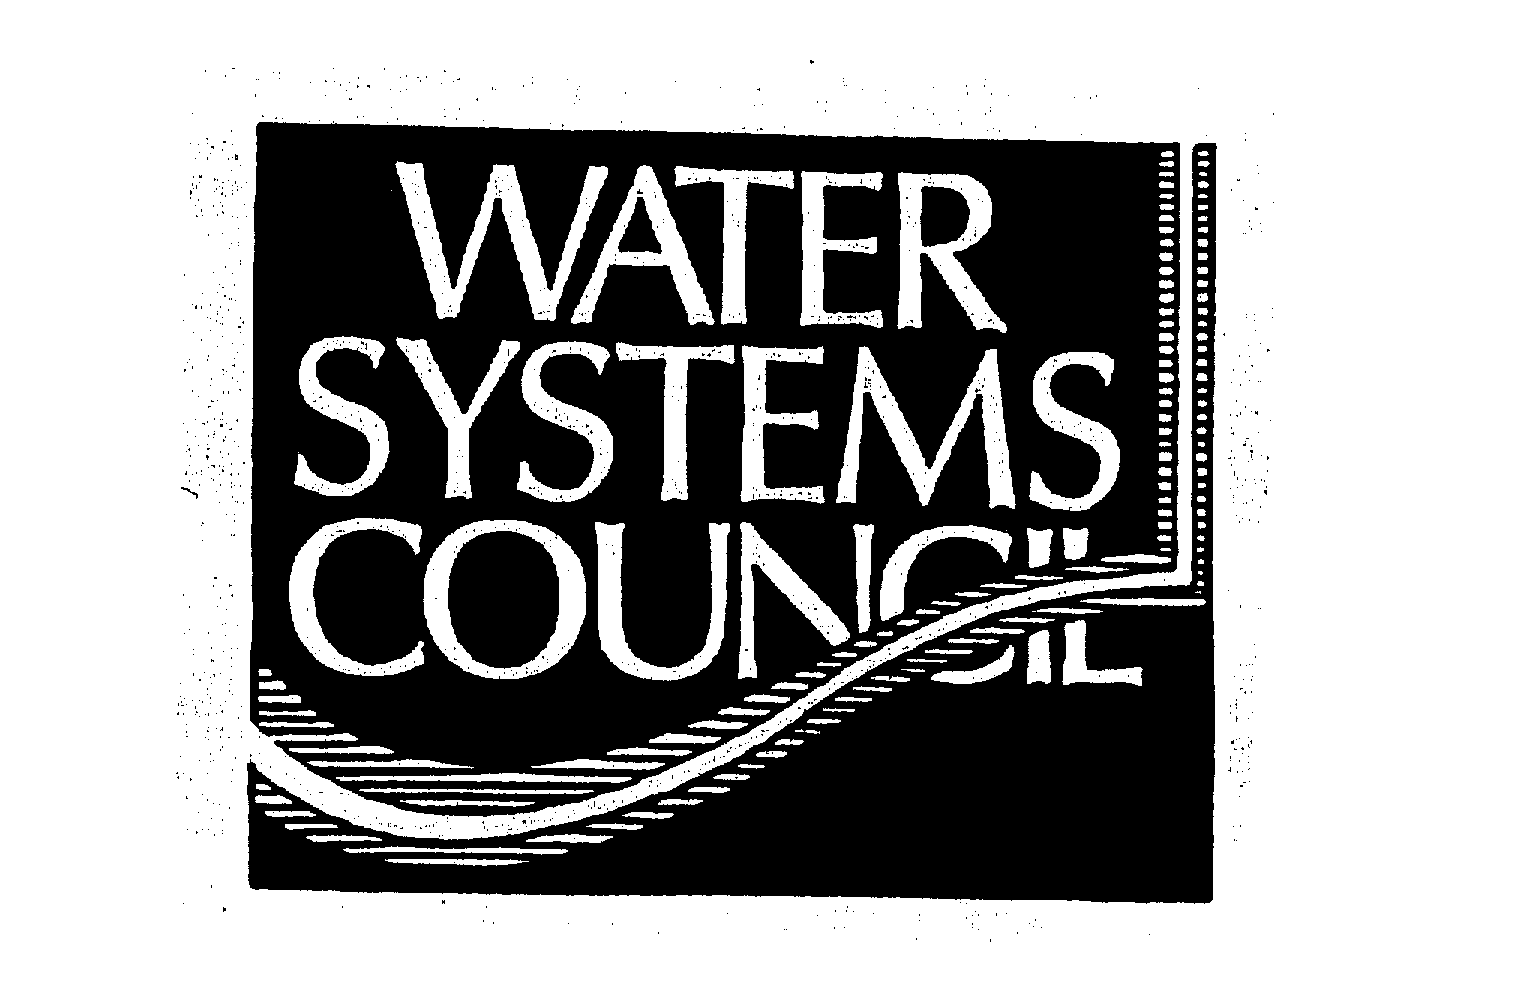  WATER SYSTEMS COUNCIL